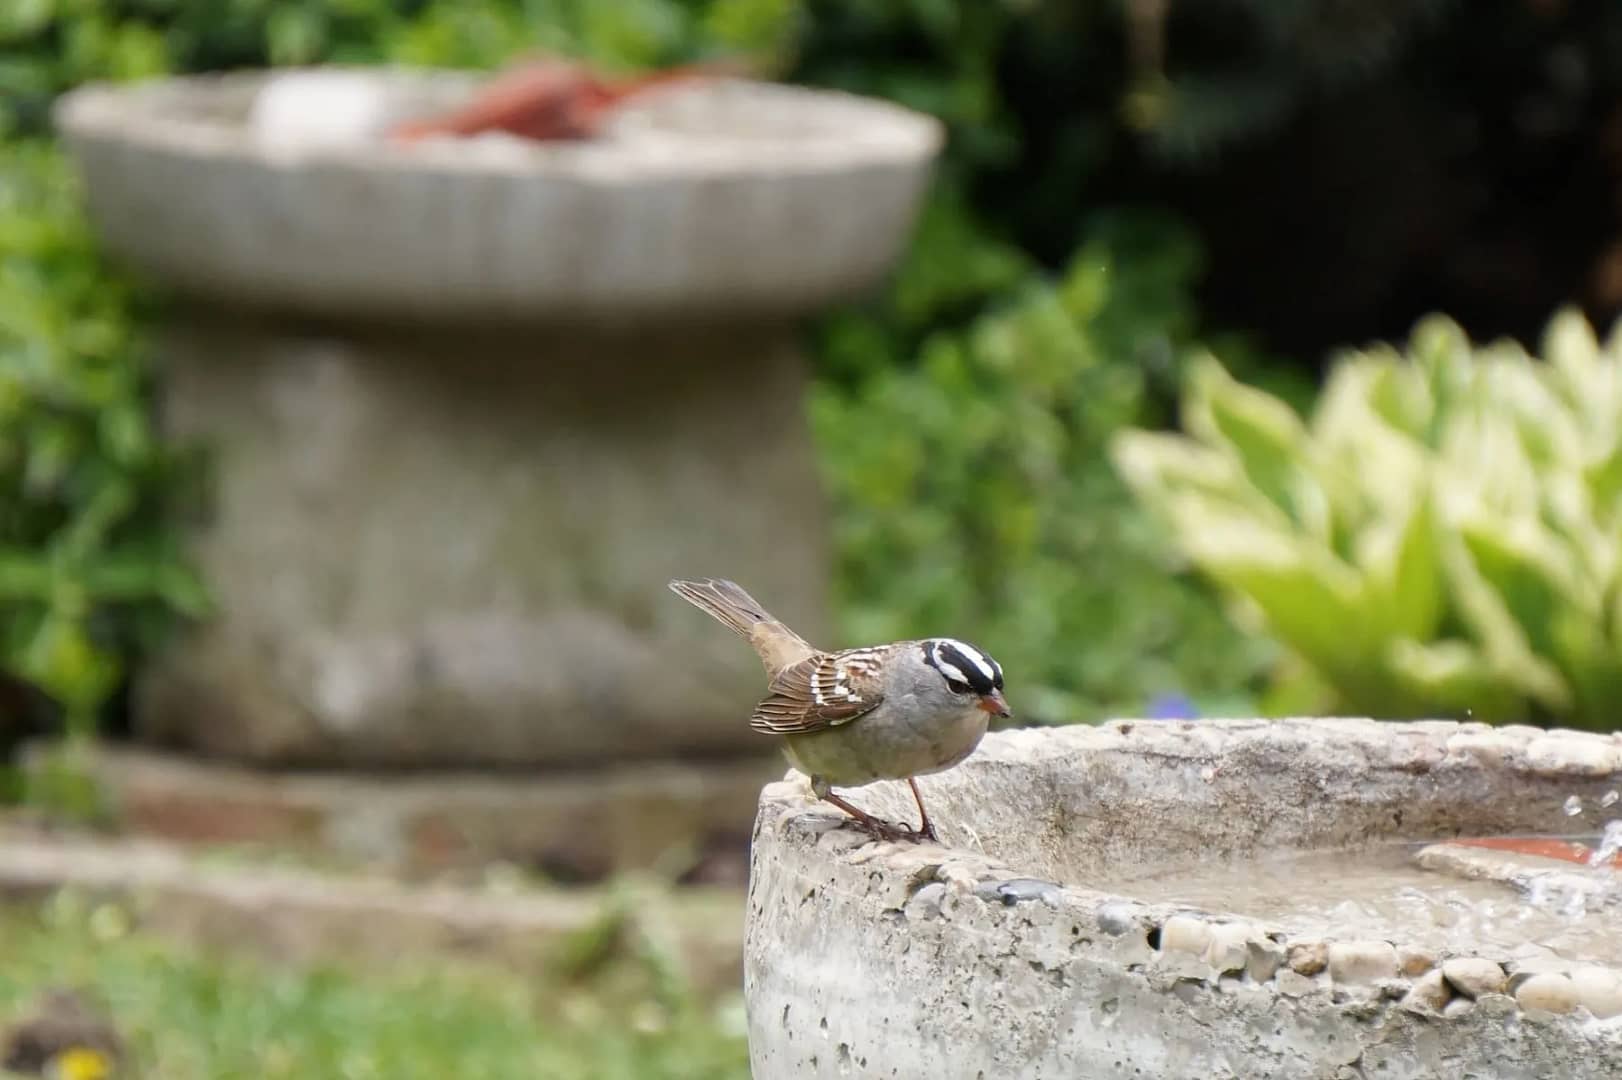 A white-crowned sparrow perched on the edge of a stone birdbath, a typical sight during camping birdwatching for beginners